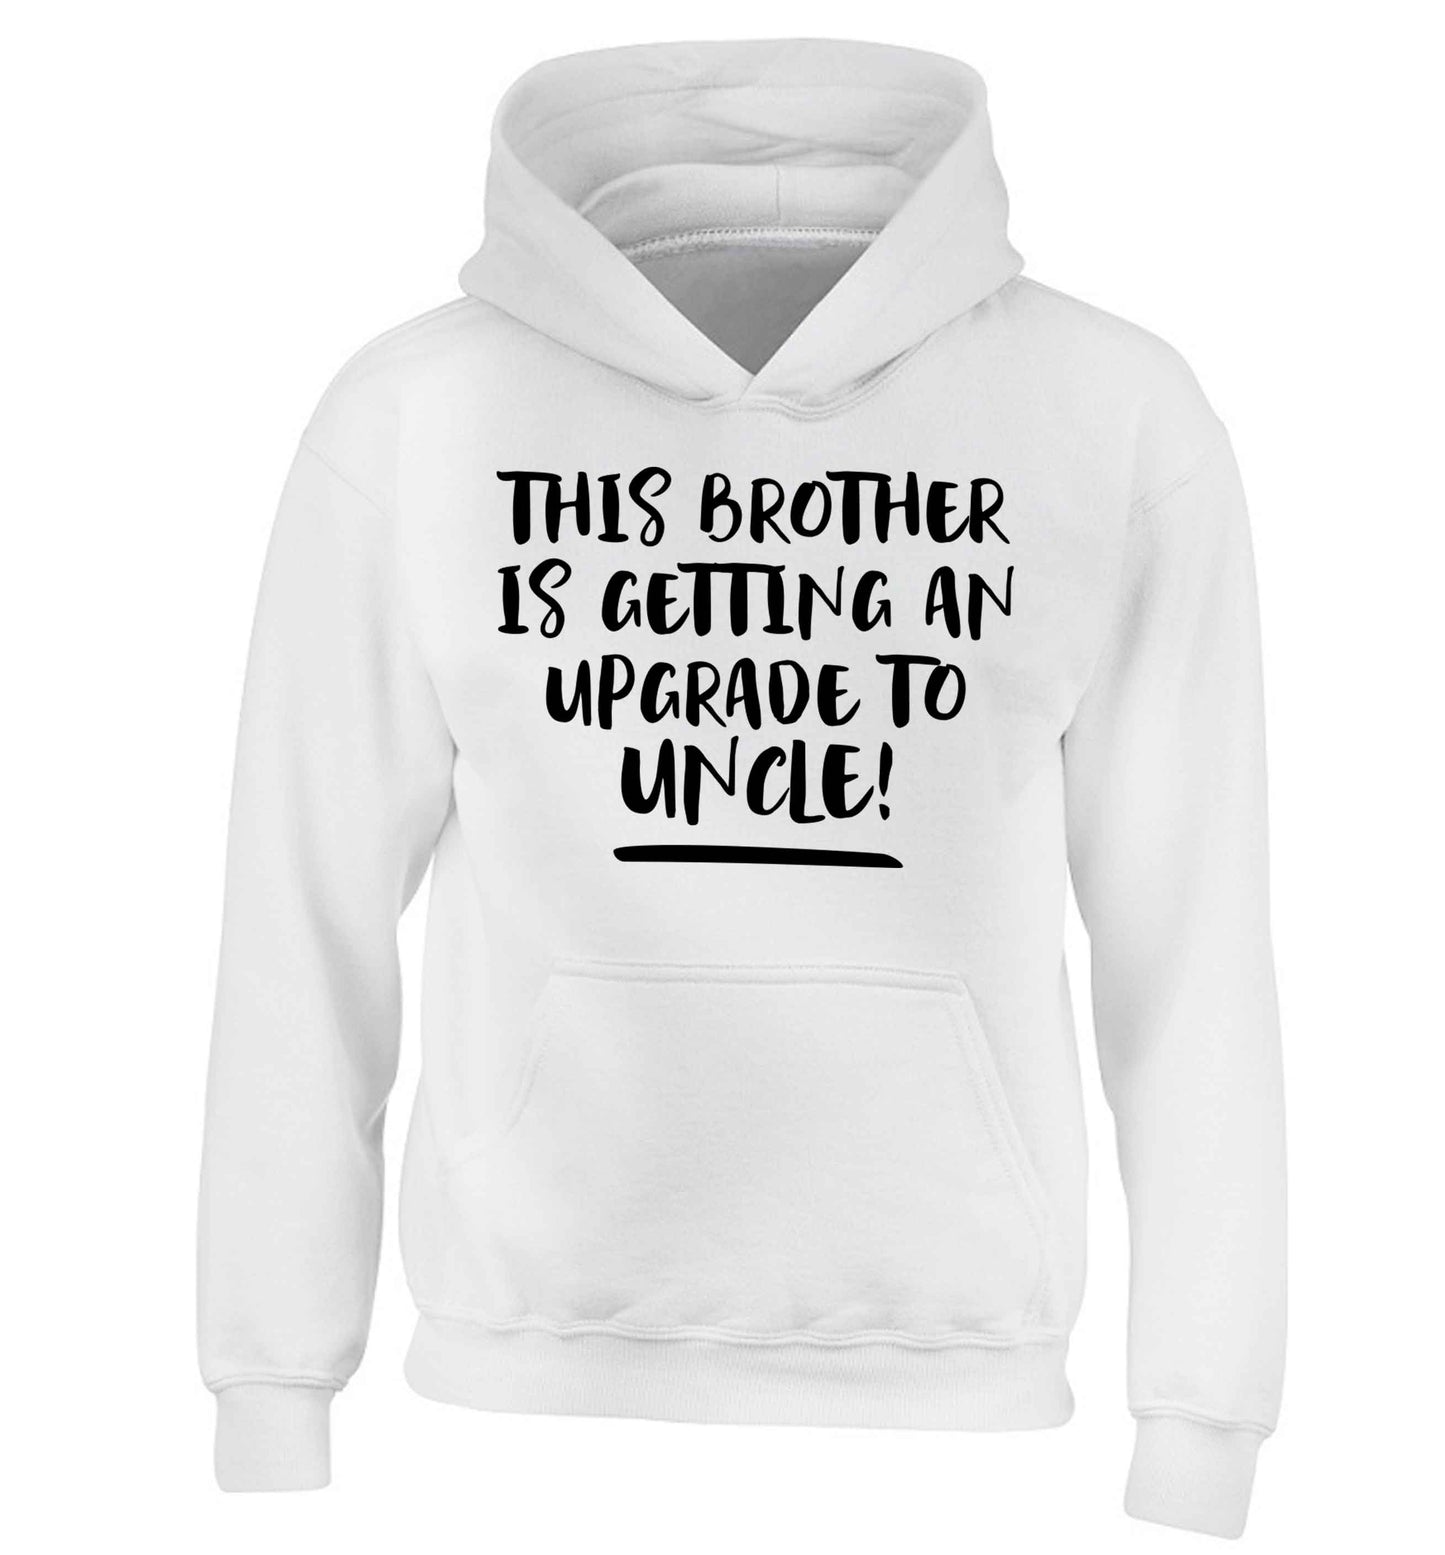 This brother is getting an upgrade to uncle! children's white hoodie 12-13 Years